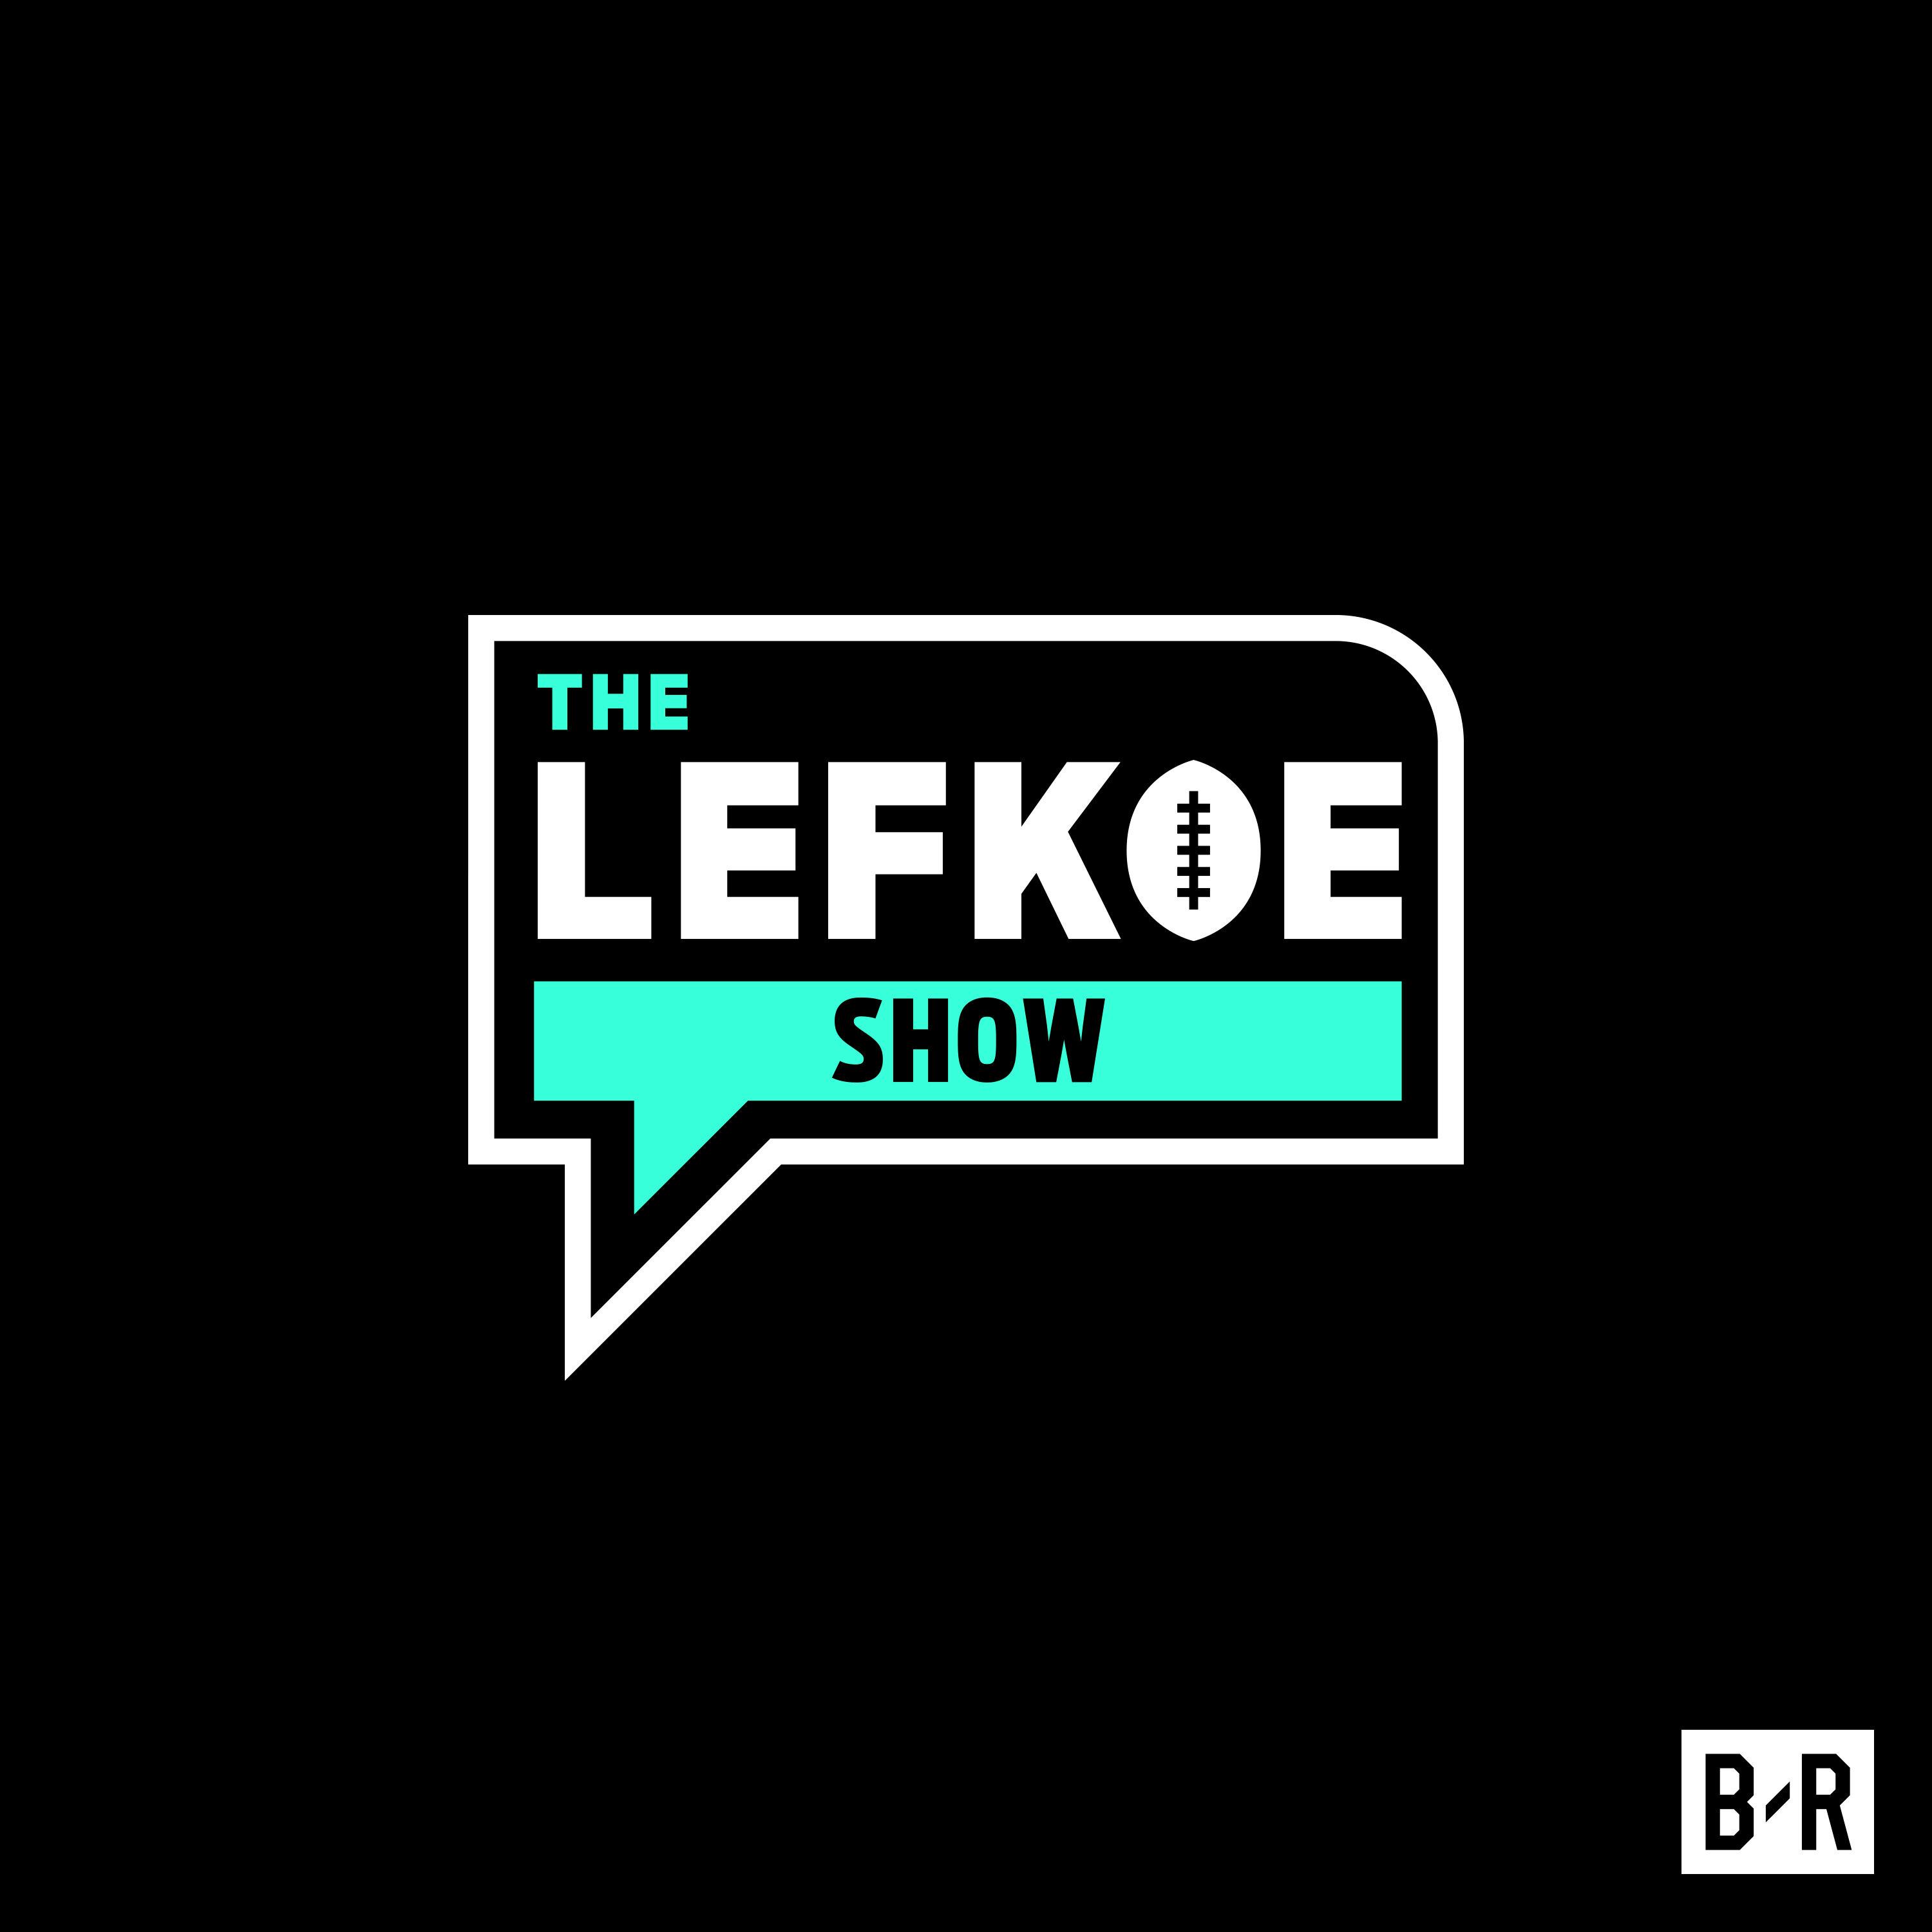 JuJu Smith-Schuster on Free Agency, Steelers Fans, and More, Plus Former Fighter Pilot Glenn Gonzales on Jet It | The Lefkoe Show